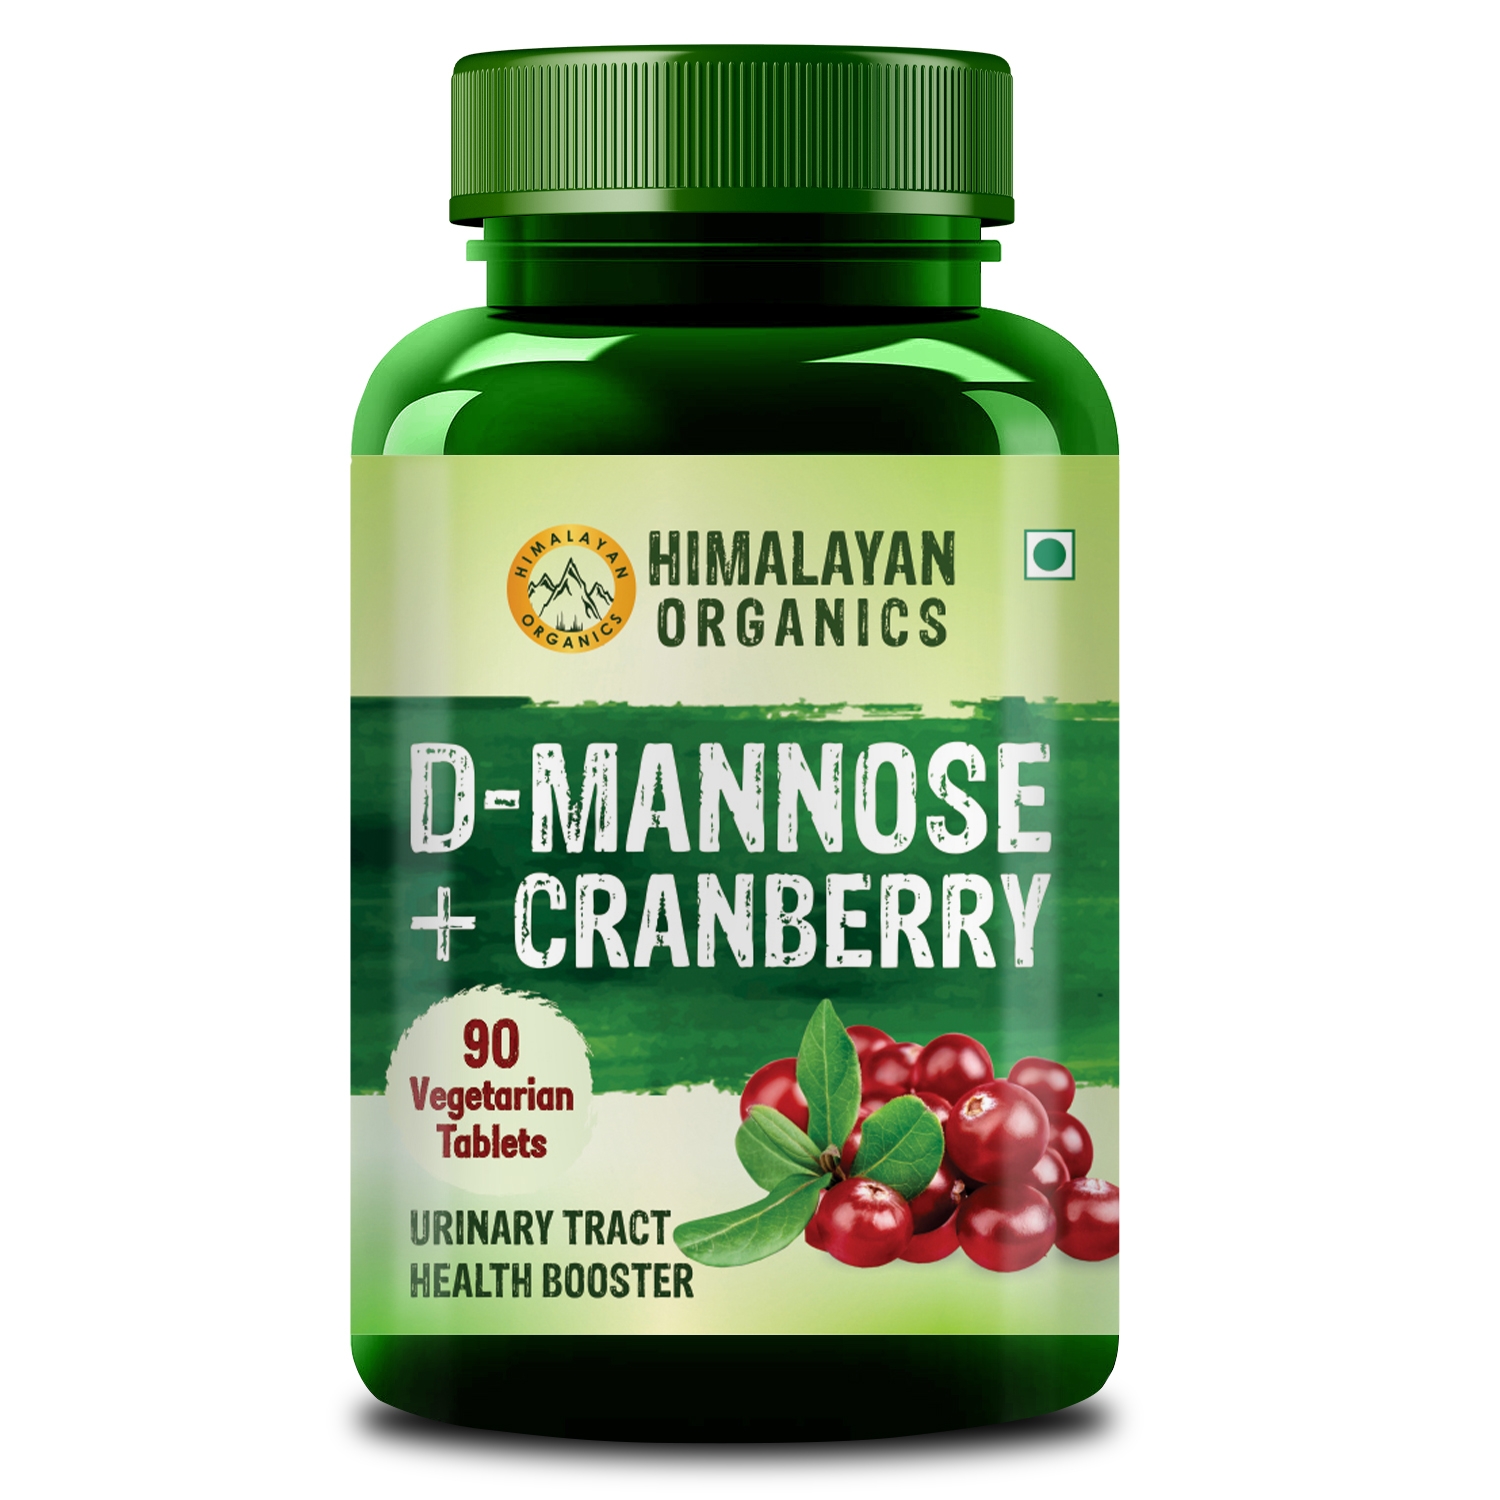 Himalayan Organics | Himalayan Organics D-Mannose + Cranberry Antioxidant Rich Supplement for Kidney Health & Urinary Tract Infection - 90 Tablets